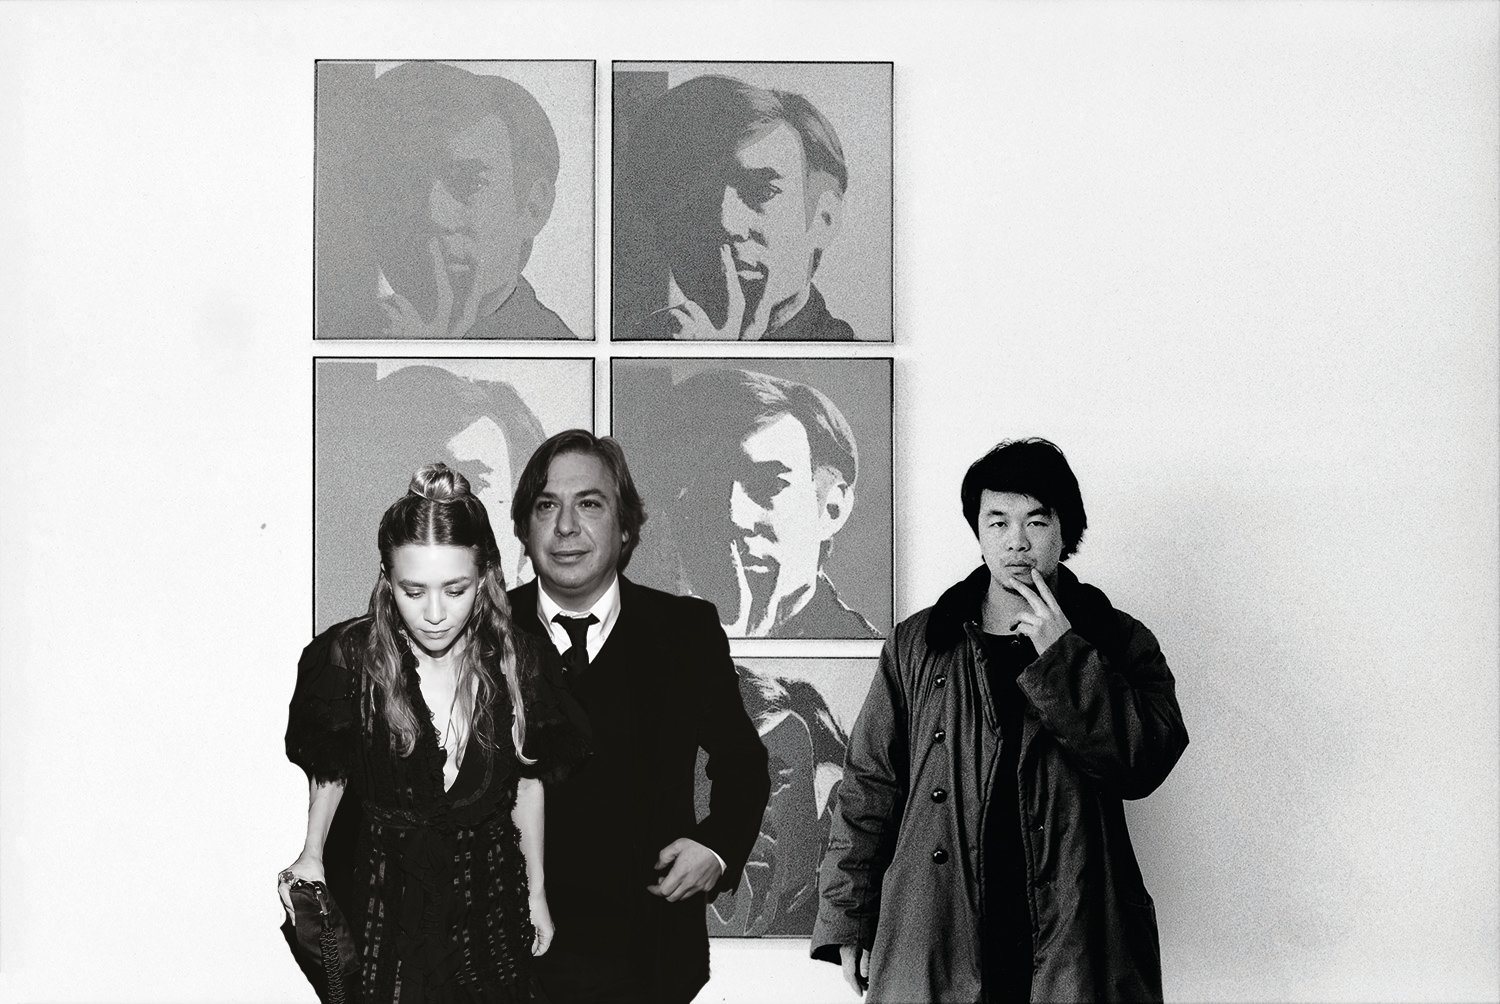 Ai Weiwei, At the Museum of Modern Art, 1987, from the New York Photographs series 1983–93, collection of Ai Weiwei, © Ai Weiwei; Andy Warhol artwork © The Andy Warhol Foundation for the Visual Arts, Inc. Courtesy of Getty Images.